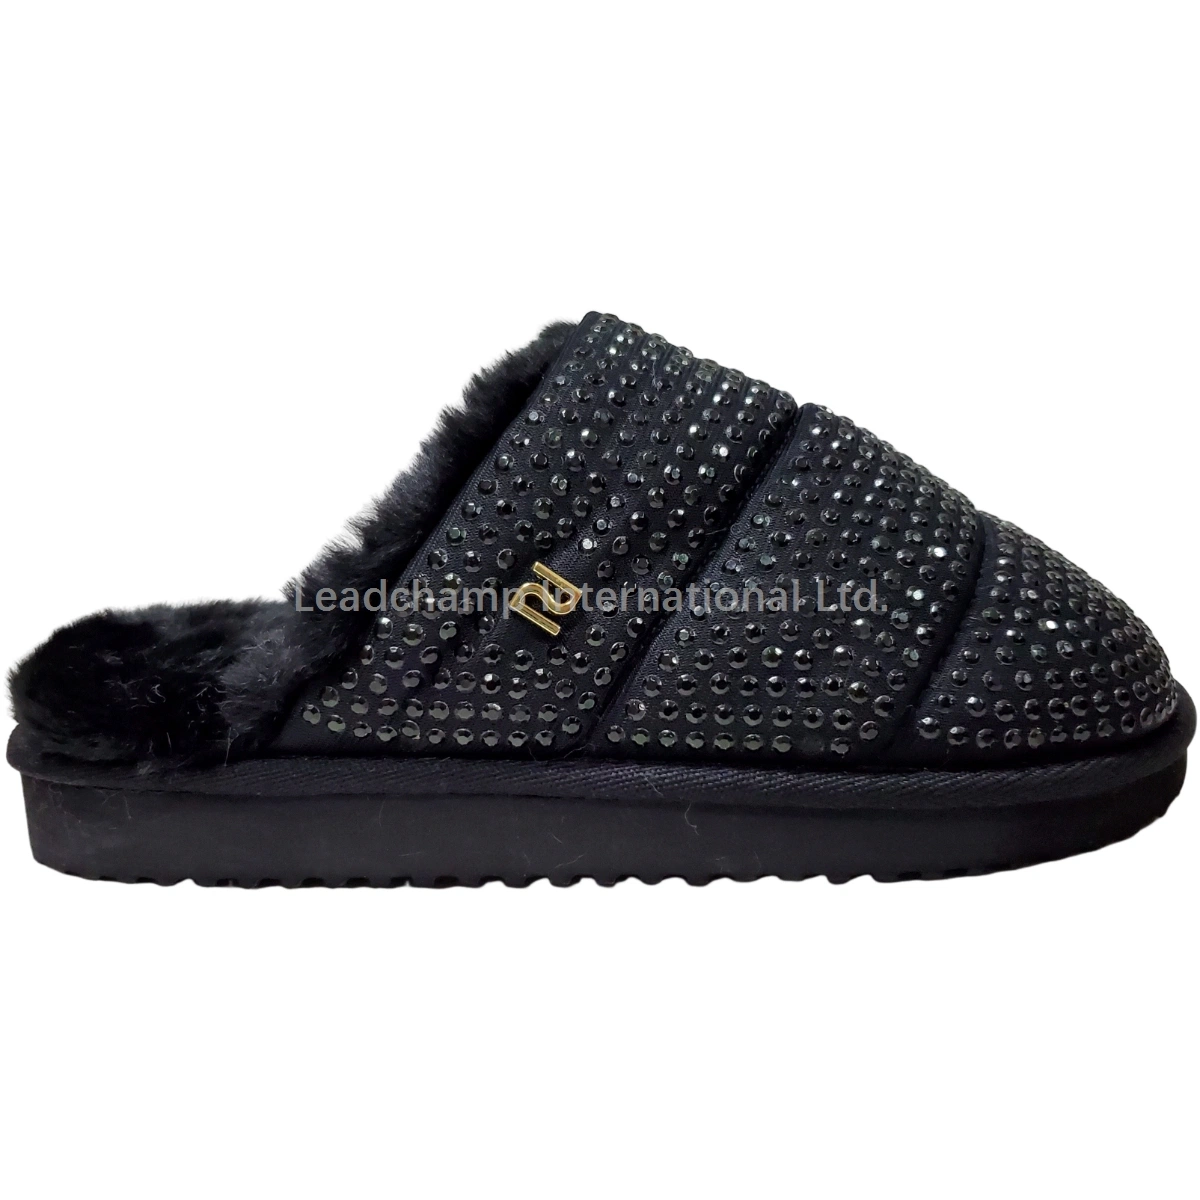 Stylish Microfiber with Studs Comfy Furry Lining Home Children Indoor Slipper